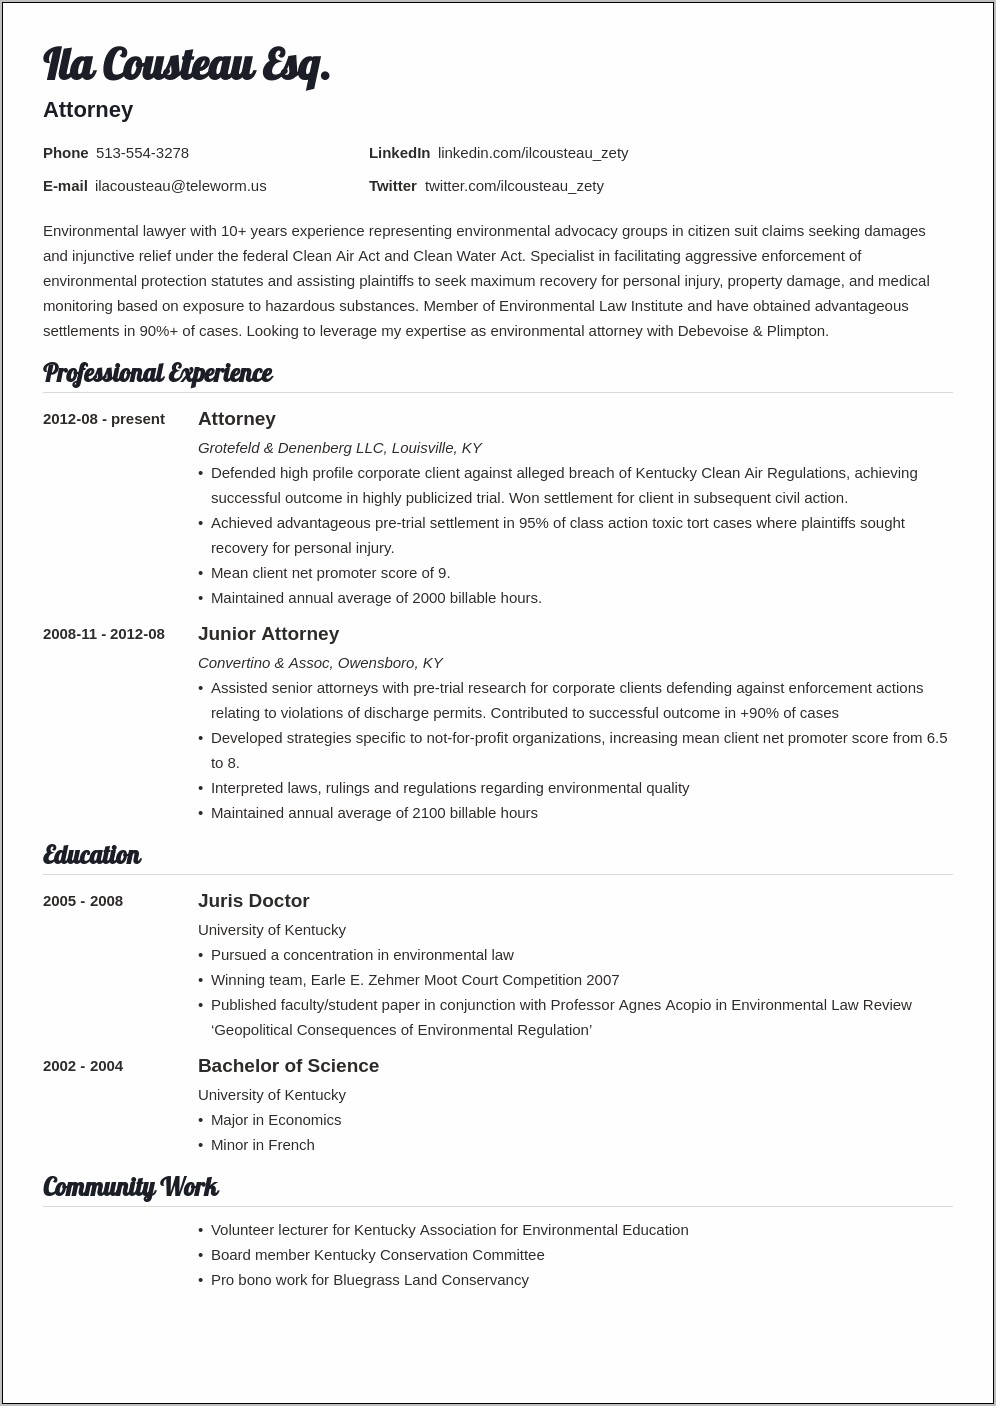 Resume Skills Section For A Lawyer